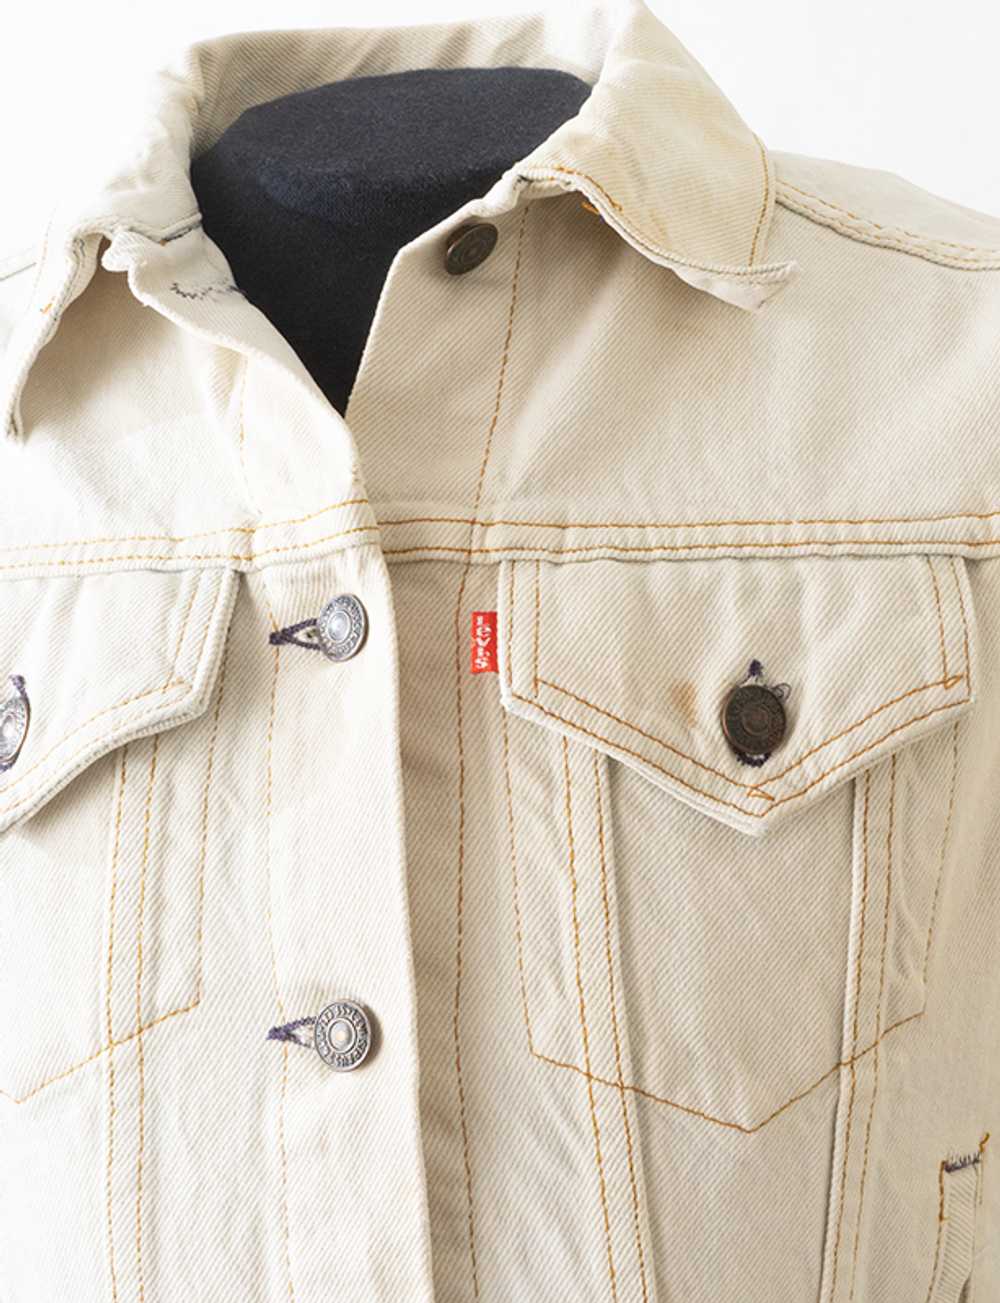 Early 80s Bleached Levi's Jacket - image 2